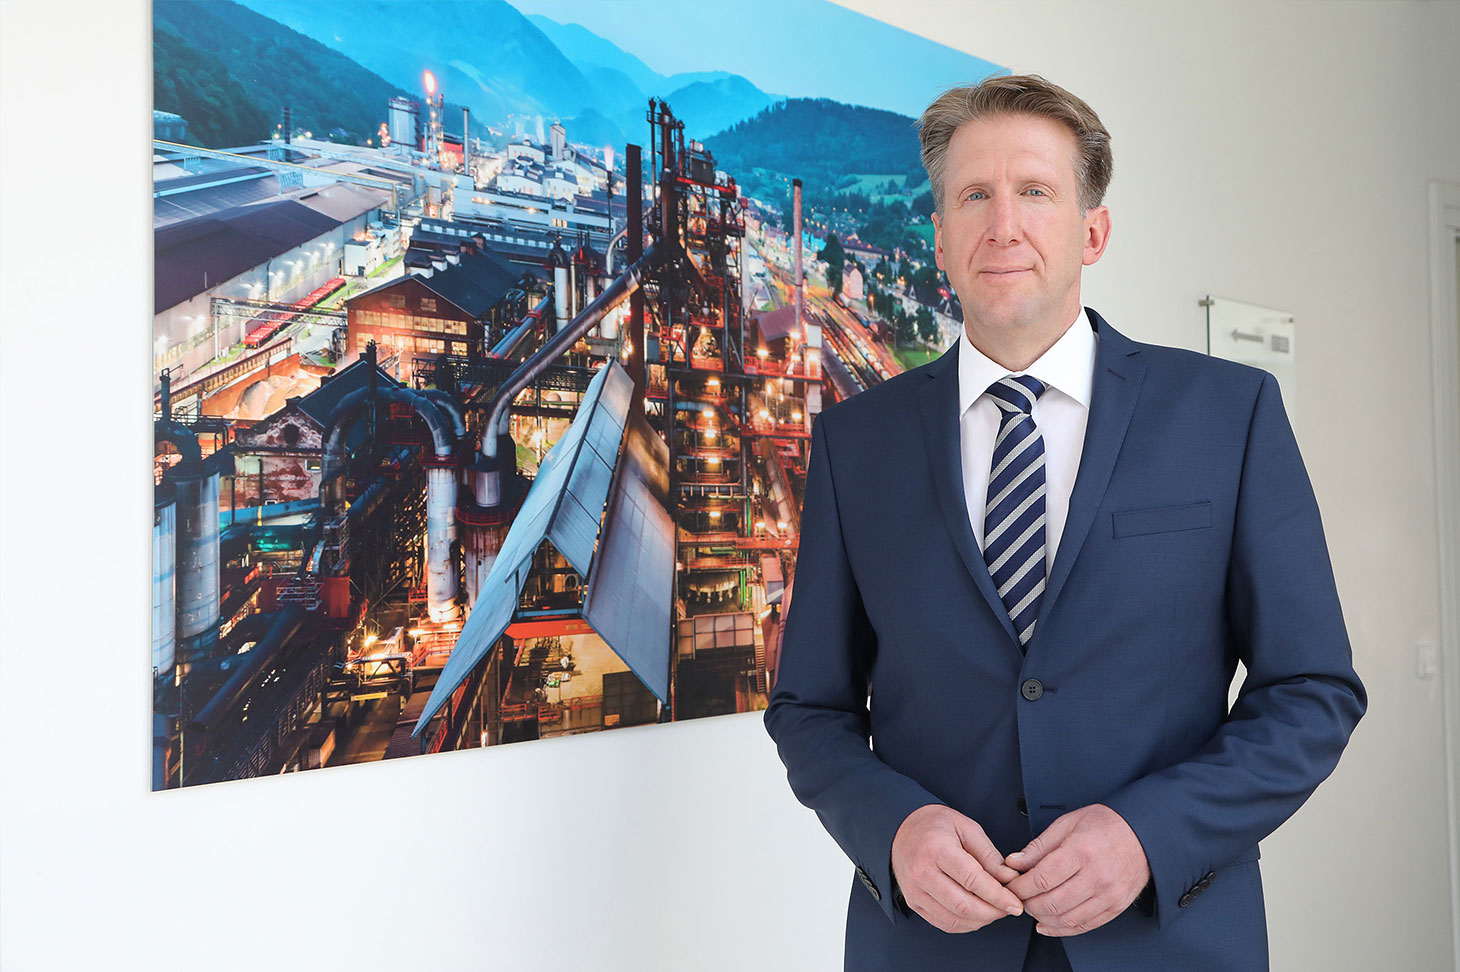 Gerhard Schuster, Managing Director responsible for production at voestalpine Stahl Donawitz GmbH, standing before a—still—representative painting of his site.